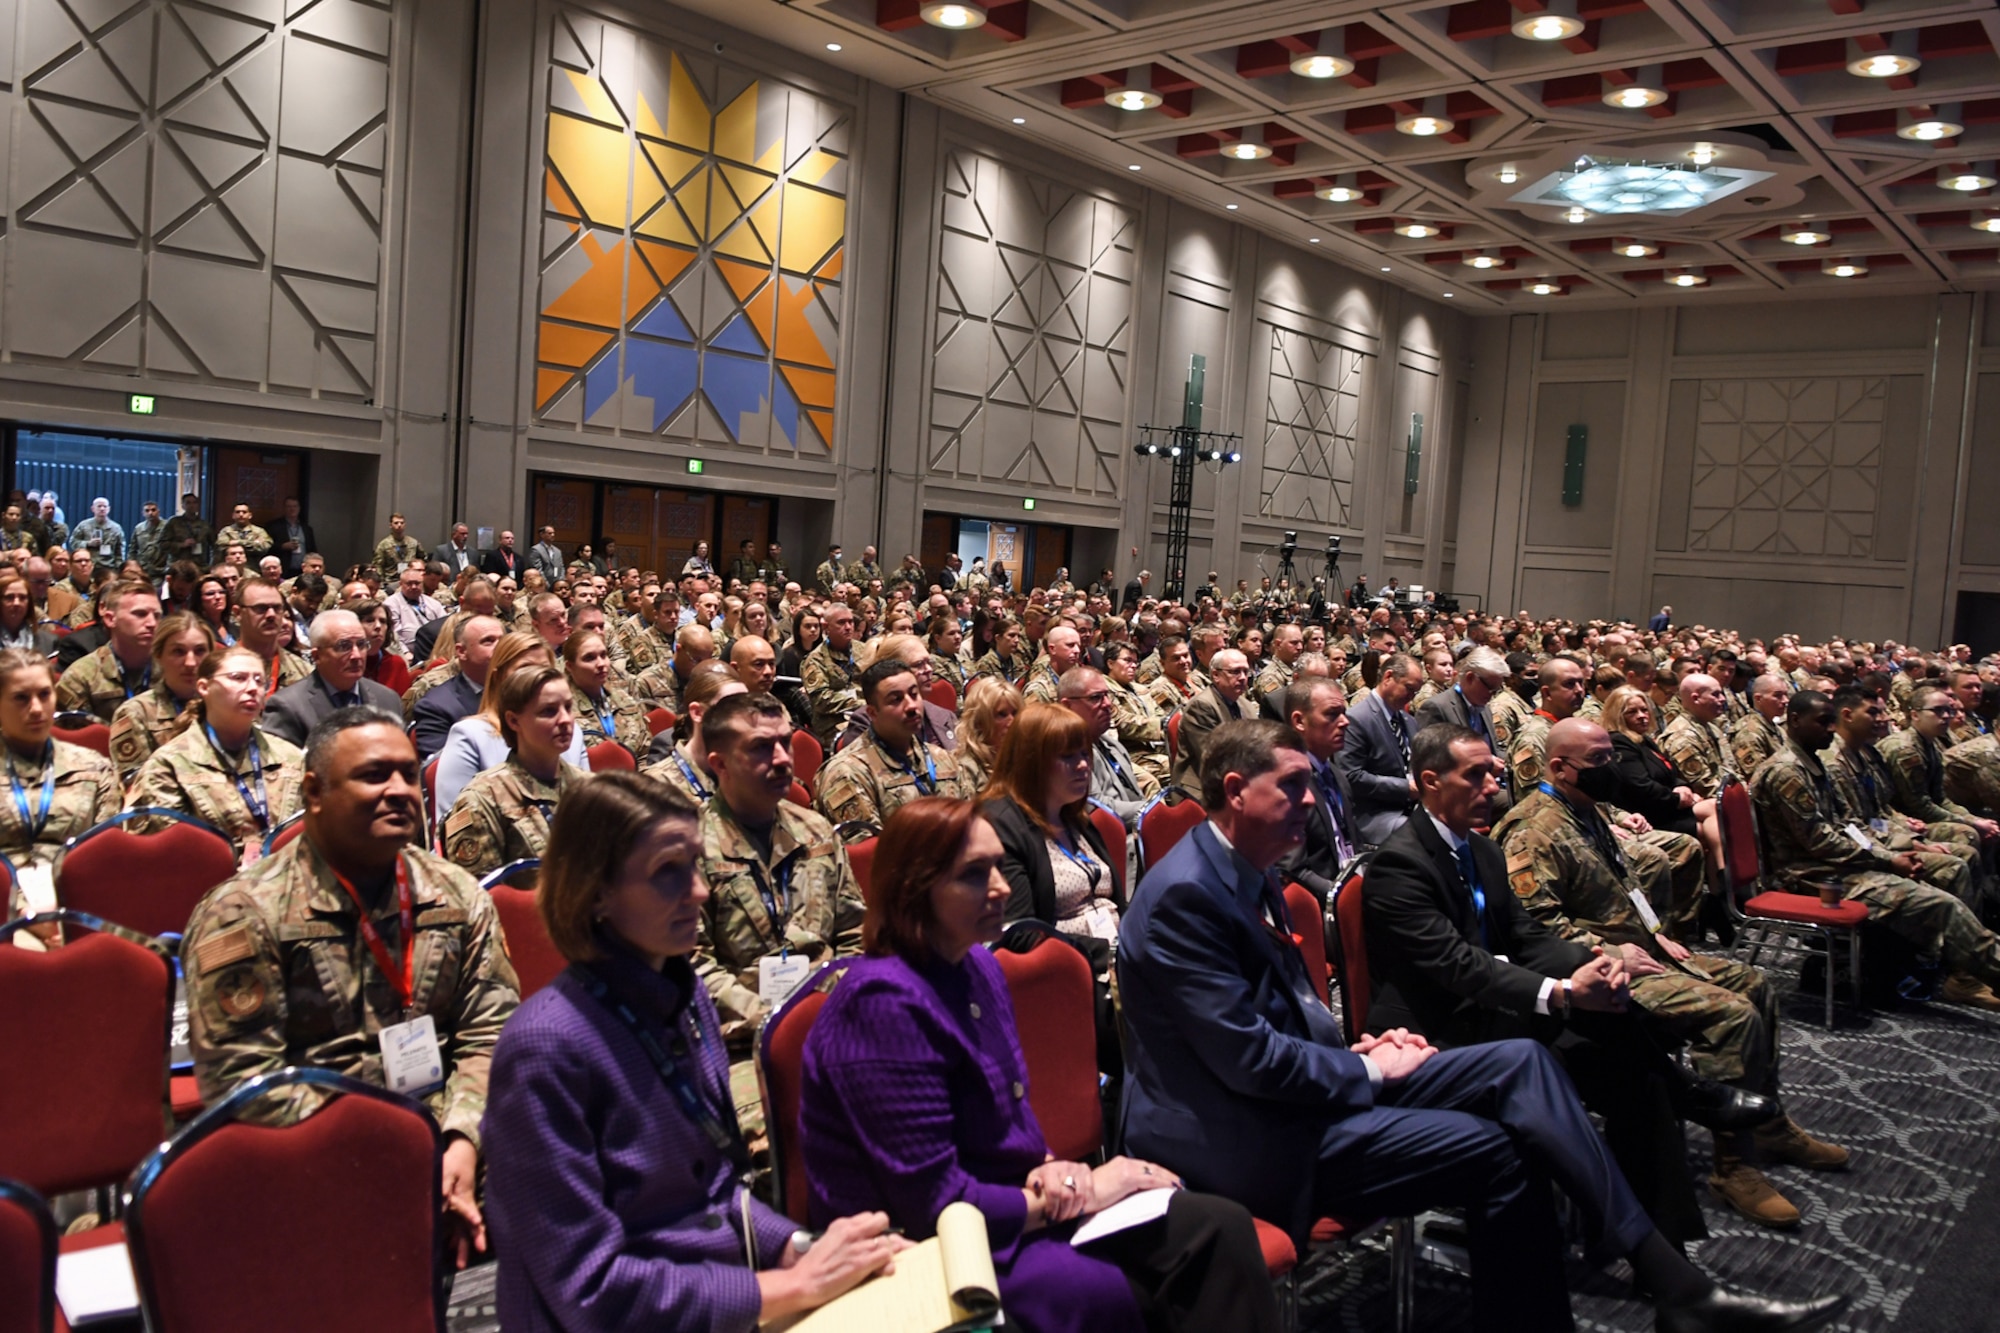 Nearly 2,000 military logisticians listen to a virtual keynote address given by Secretary of the Air Force Frank Kendall at the Logistics Officer Association Symposium in Salt Lake City, March 16, 2022. Kendall underscored the importance of logistics in executing his operational imperatives. The non-profit LOA has served as the premier professional development organization for Air Force logistics, aircraft maintenance, and munitions officers for the last 40 years. (U.S. Air Force courtesy photo by Donna Parry)